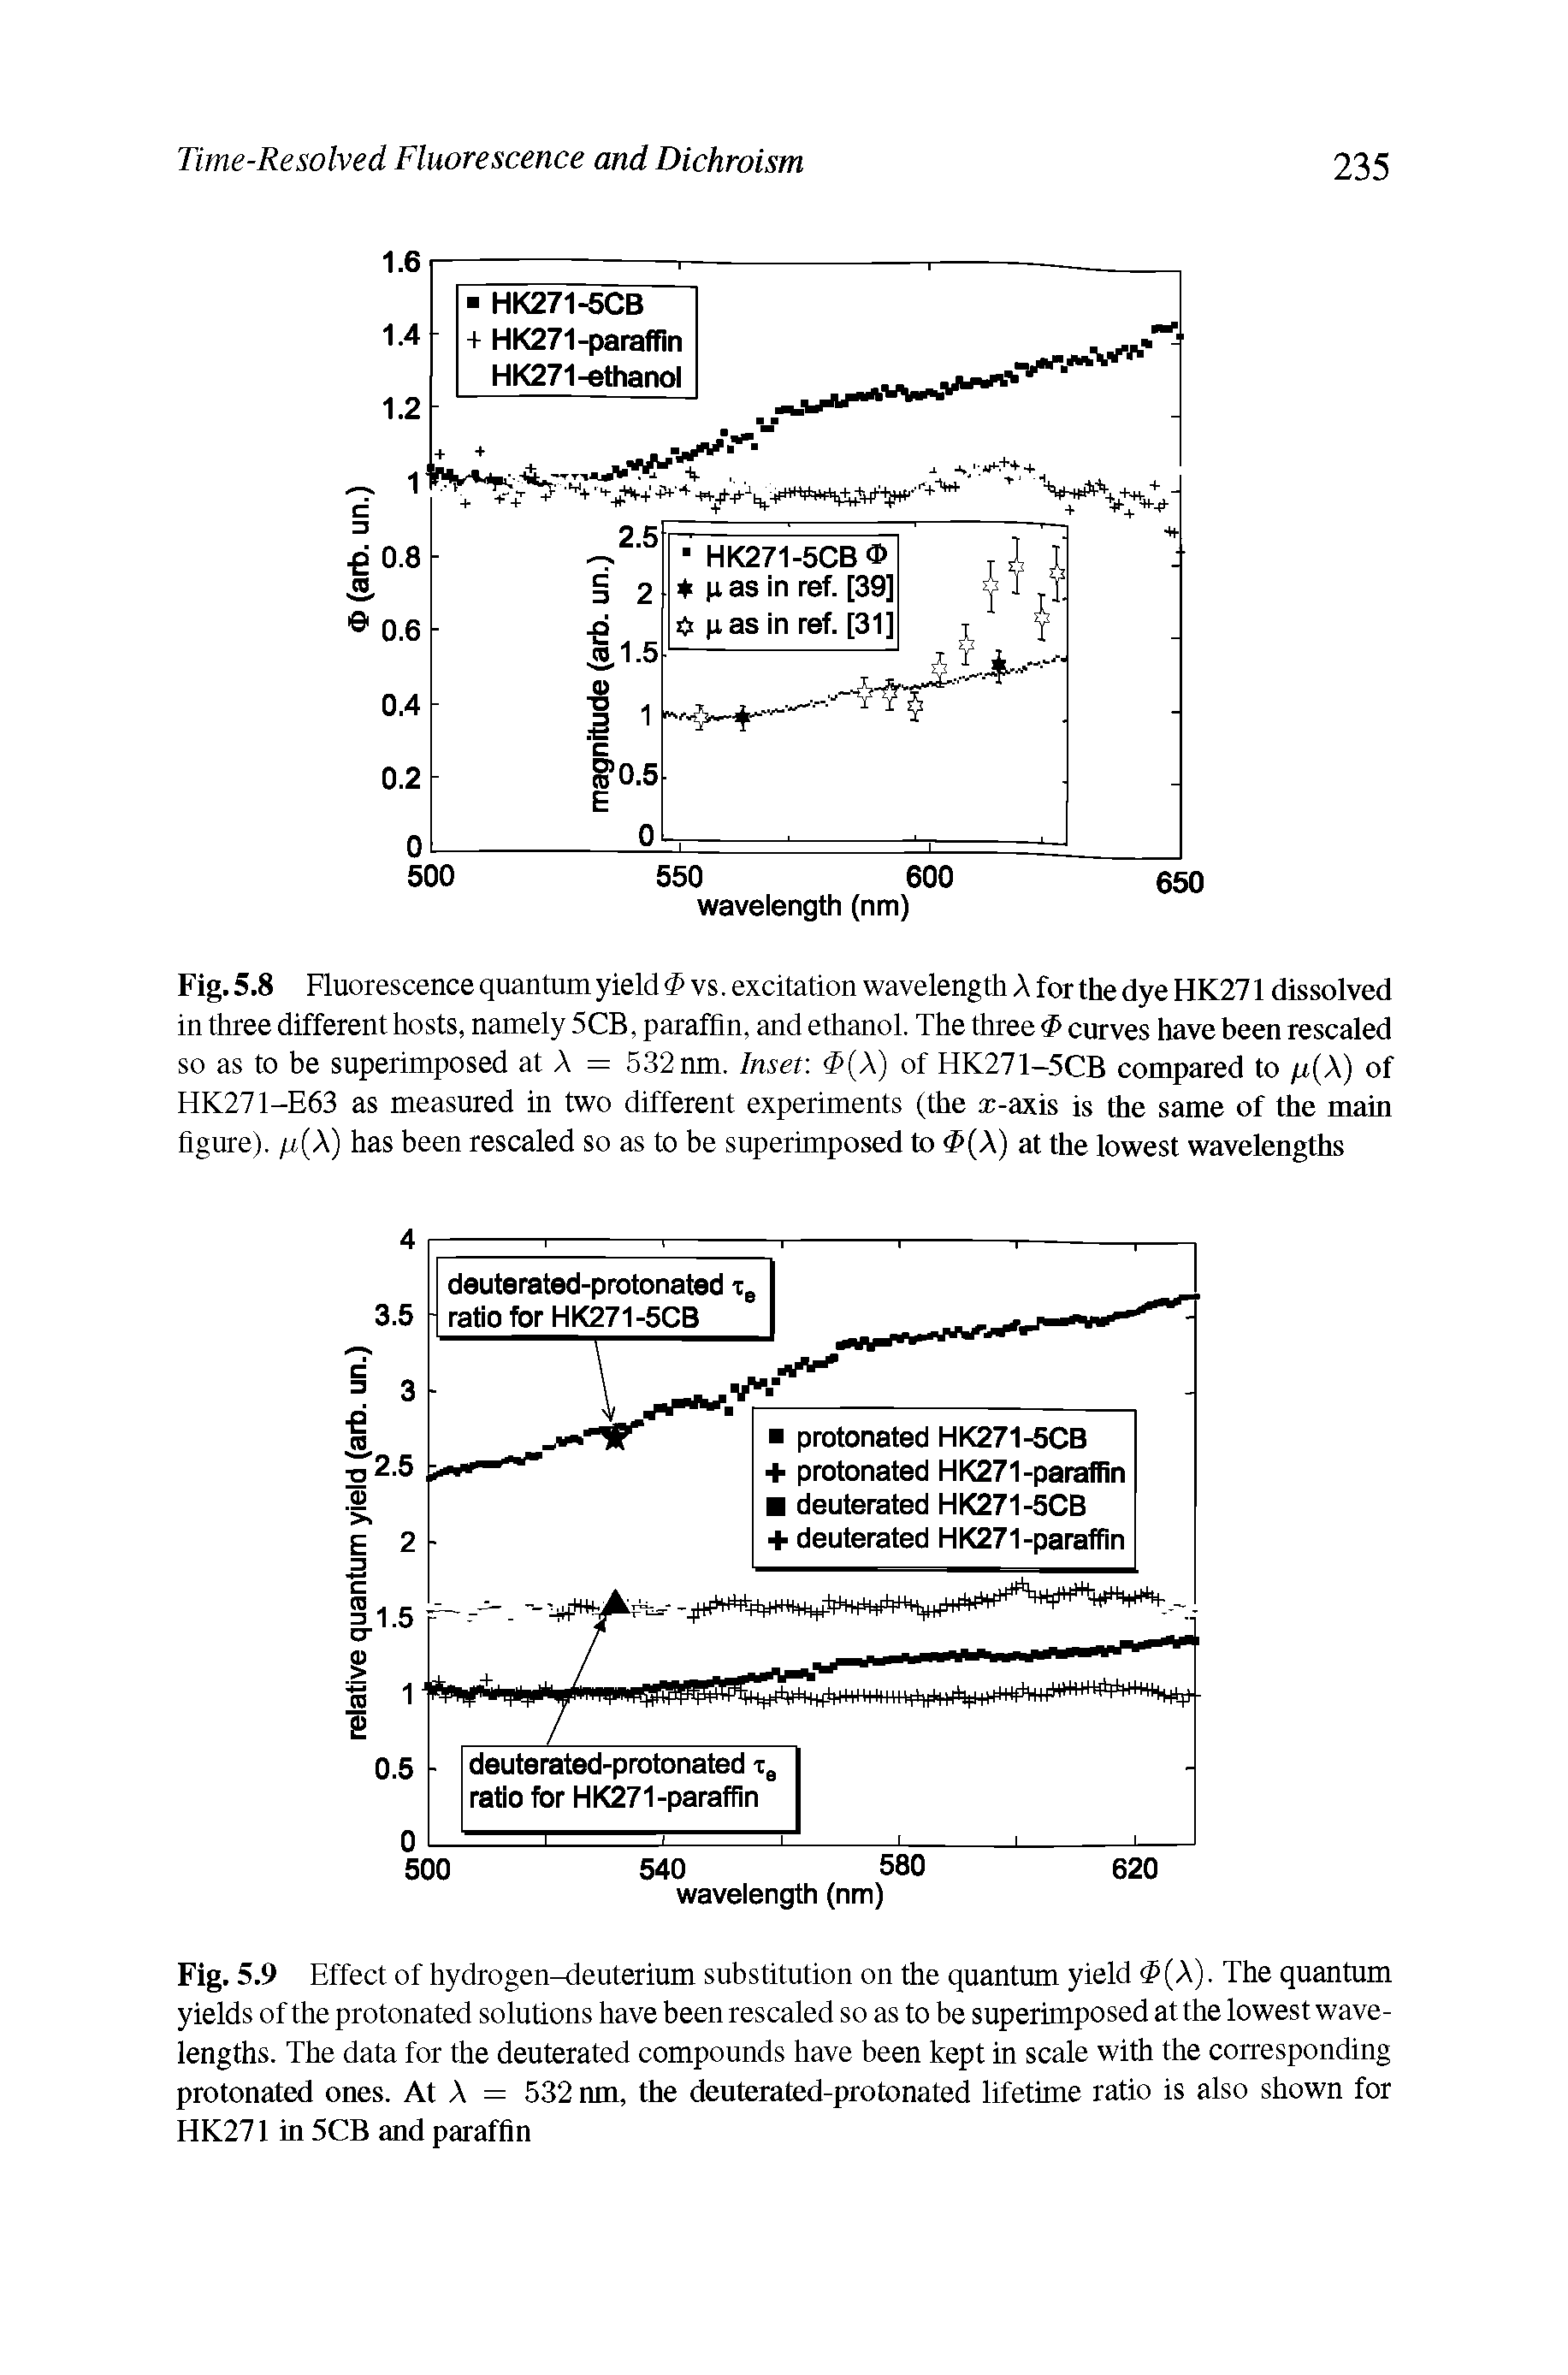 Fig. 5.9 Effect of hydrogen-deuterium substitution on the quantum yield (A). The quantum yields of the protonated solutions have been rescaled so as to be superimposed at the lowest wavelengths. The data for the deuterated compounds have been kept in scale with the corresponding protonated ones. At A = 532 nm, the deuterated-protonated lifetime ratio is also shown for HK271 in 5CB and paraffin...